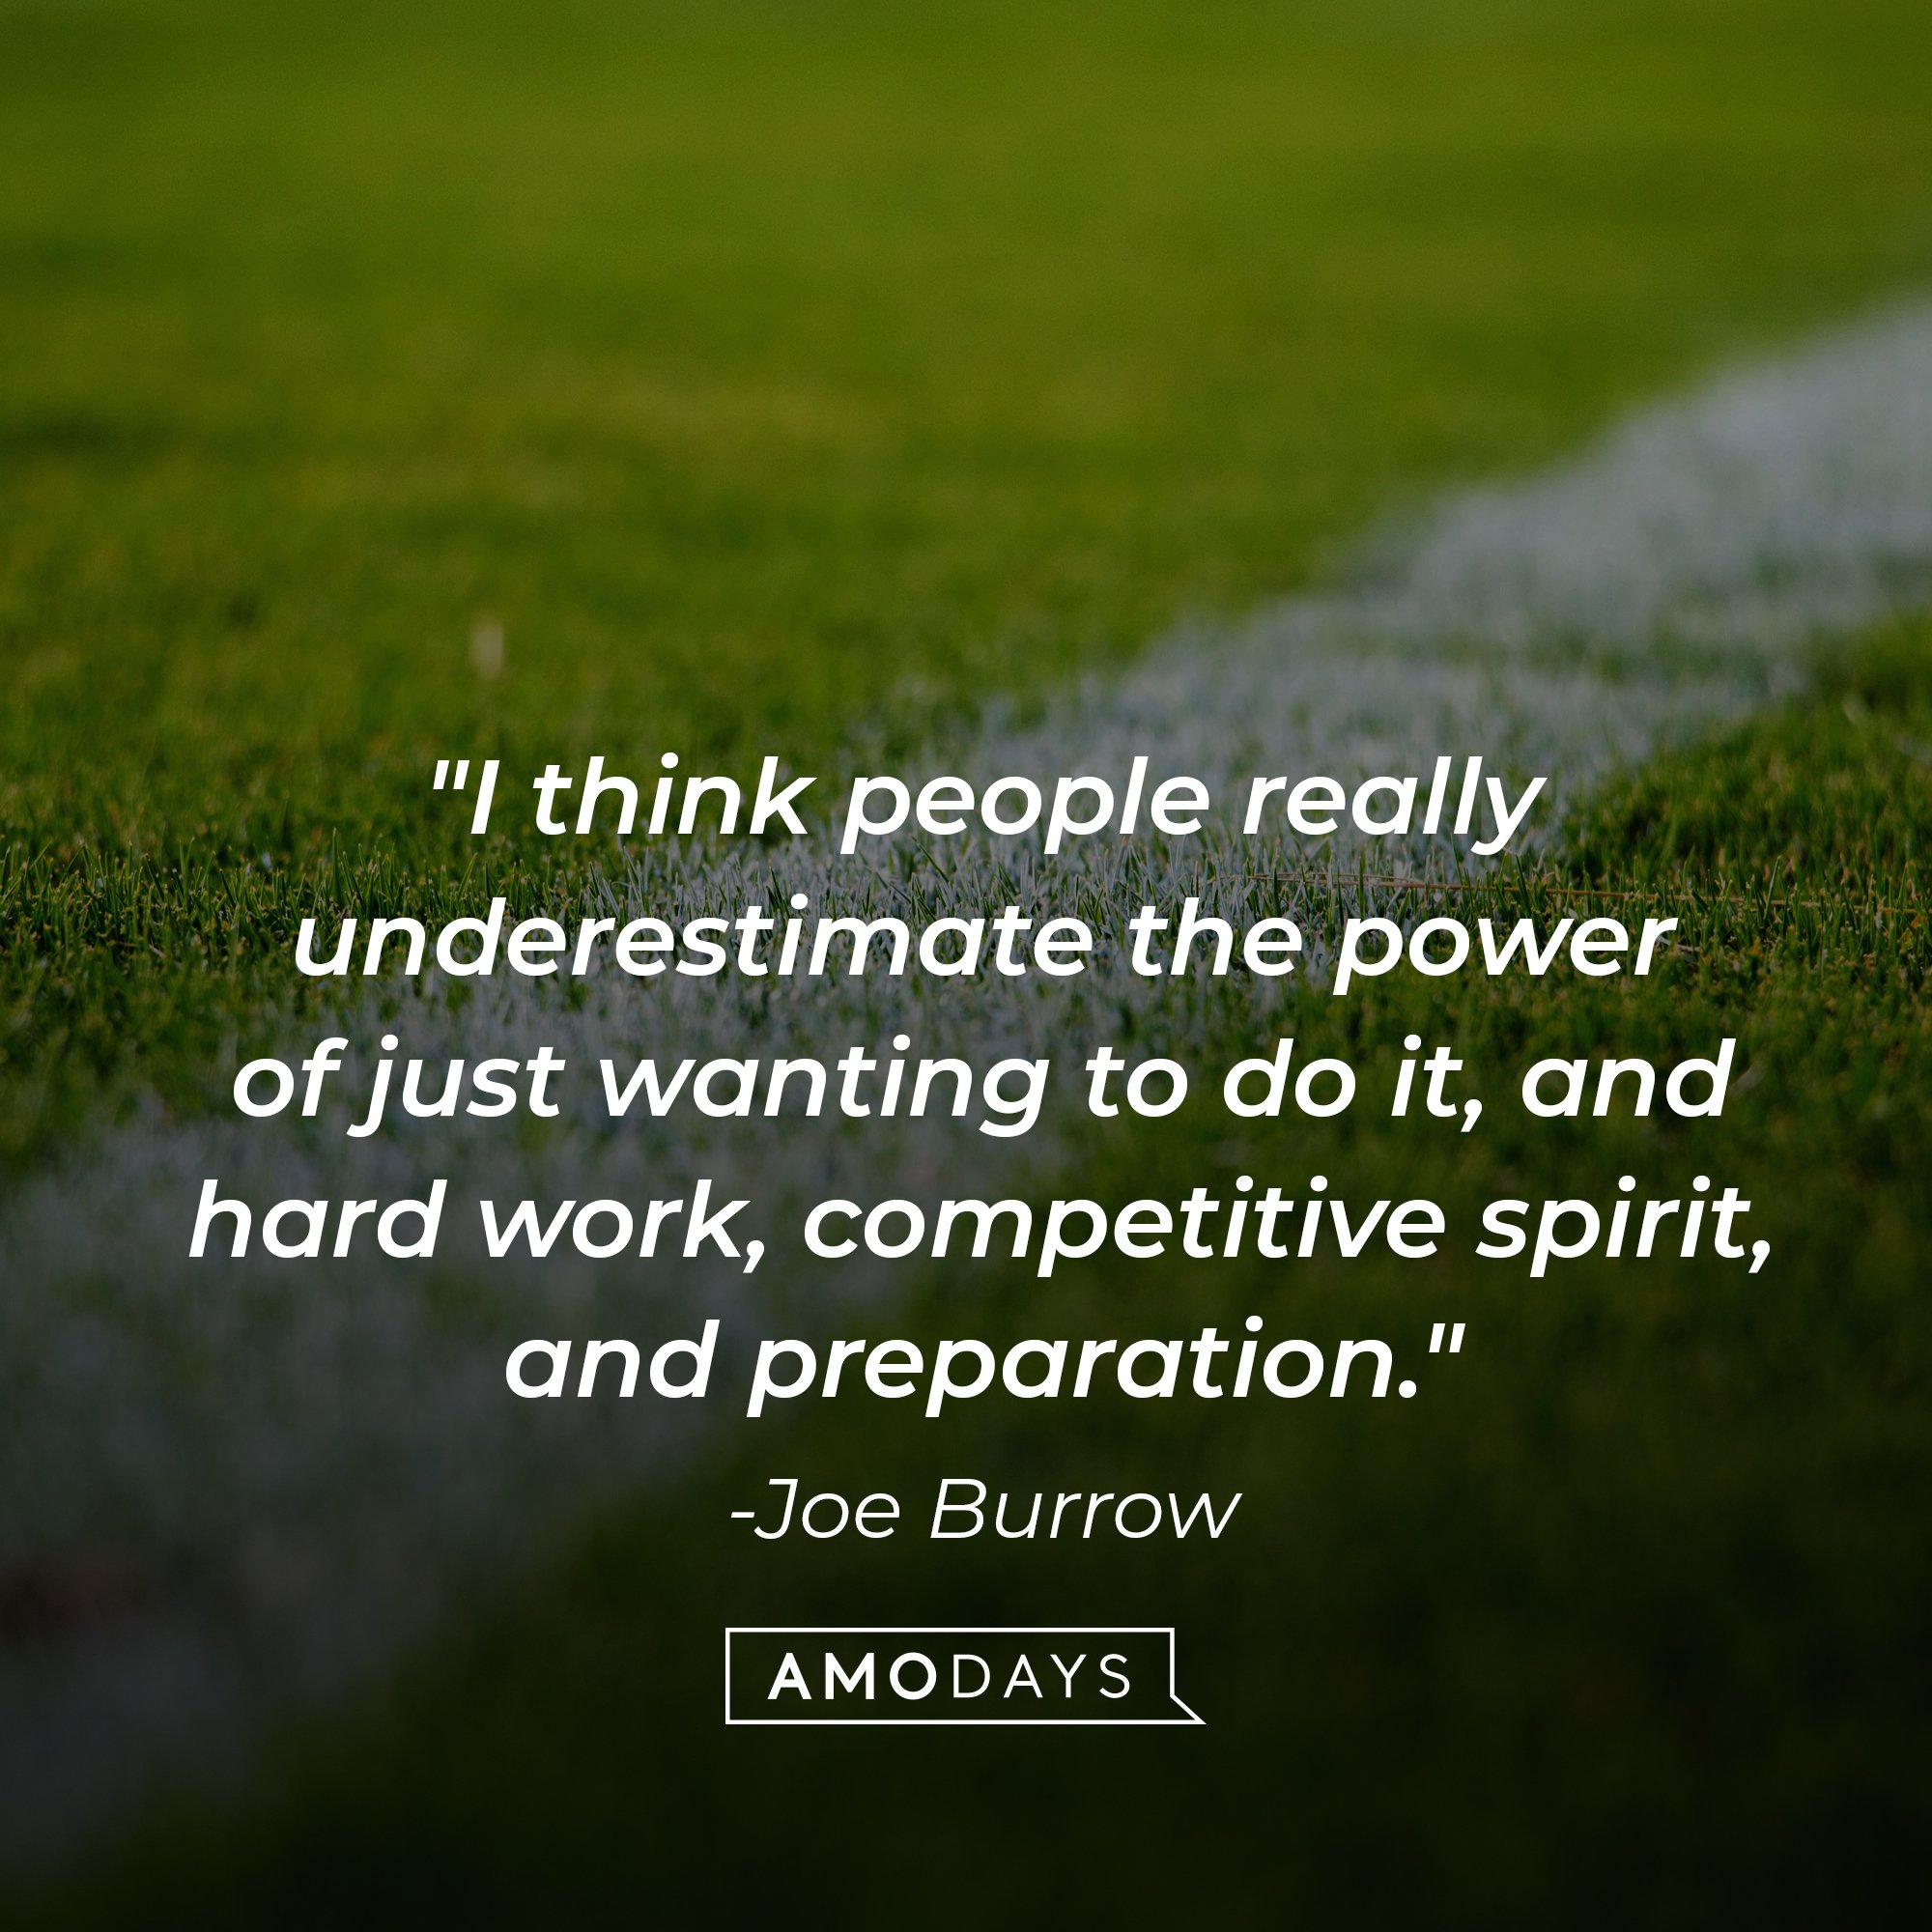  Joe Burrow's quote: "I think people really underestimate the power of just wanting to do it, and hard work, competitive spirit, and preparation." | Image: AmoDays